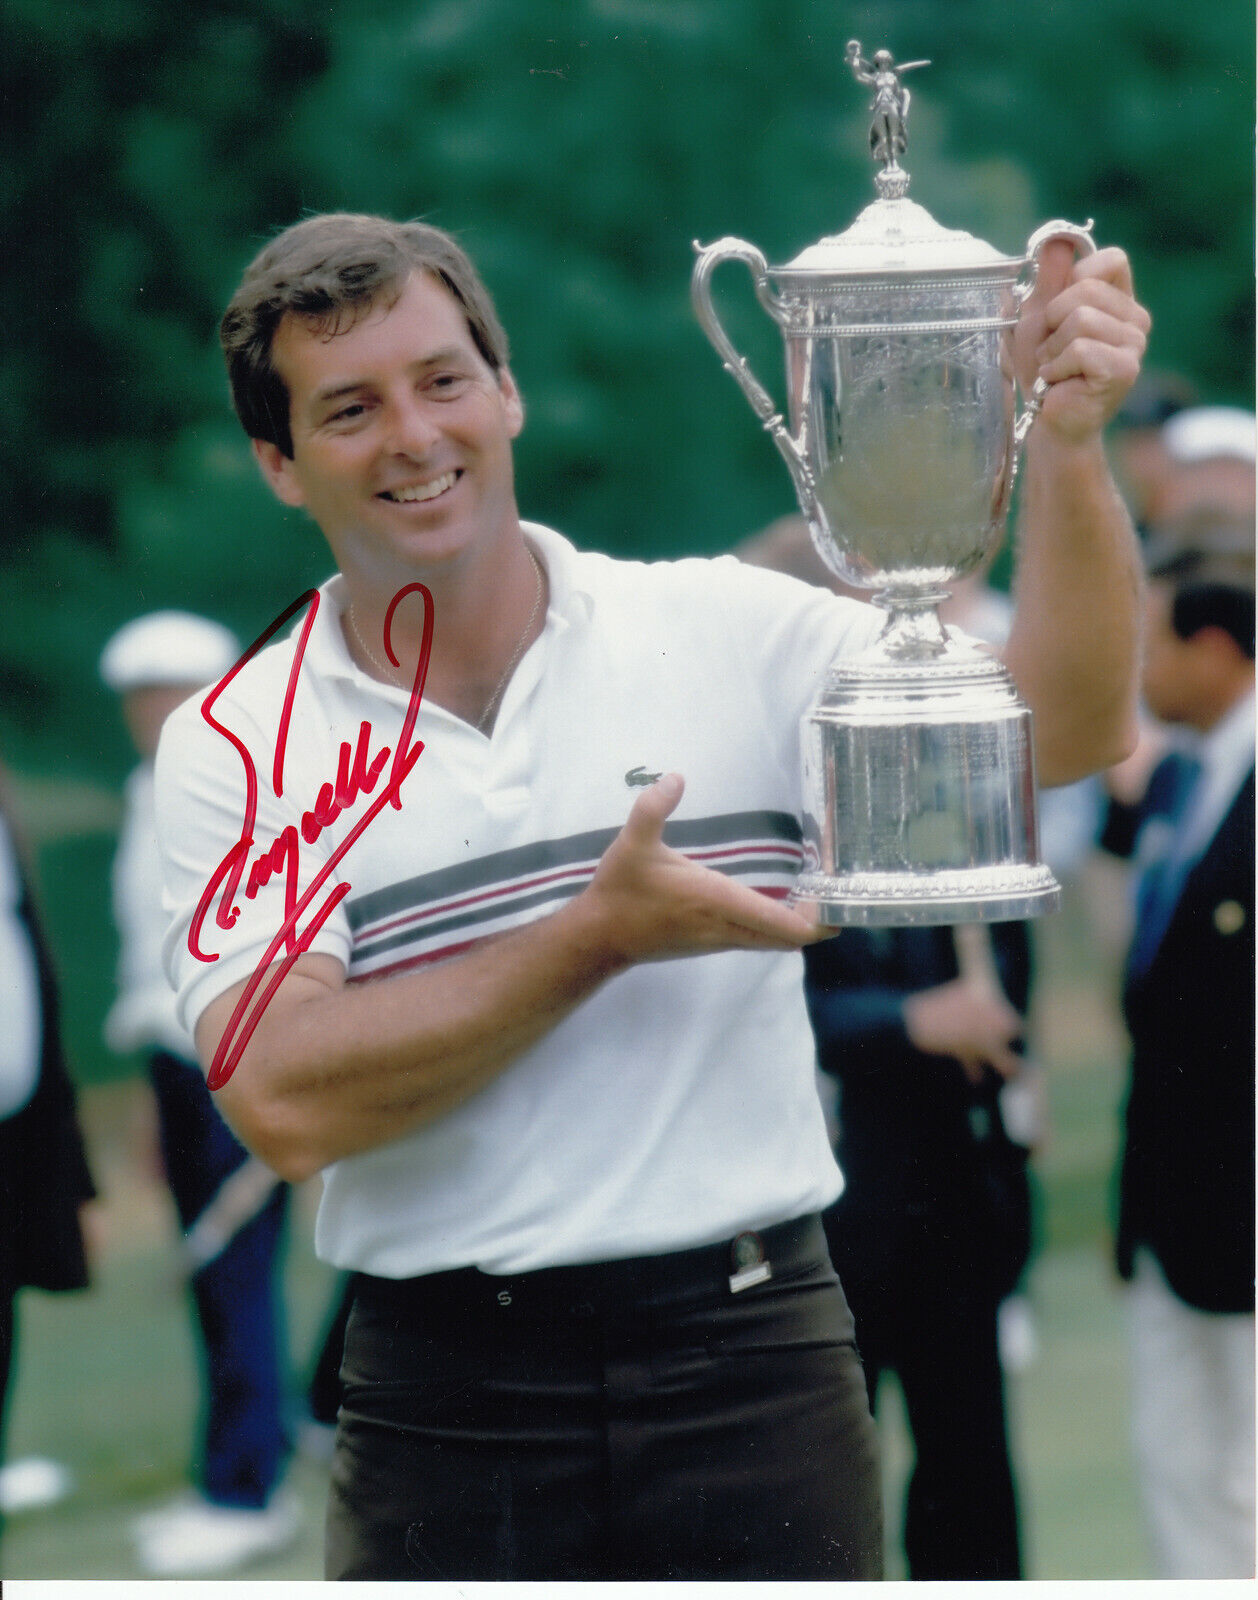 Fuzzy Zoeller #4 Masters 8x10 Signed Photo Poster painting w/ COA Golf 031019